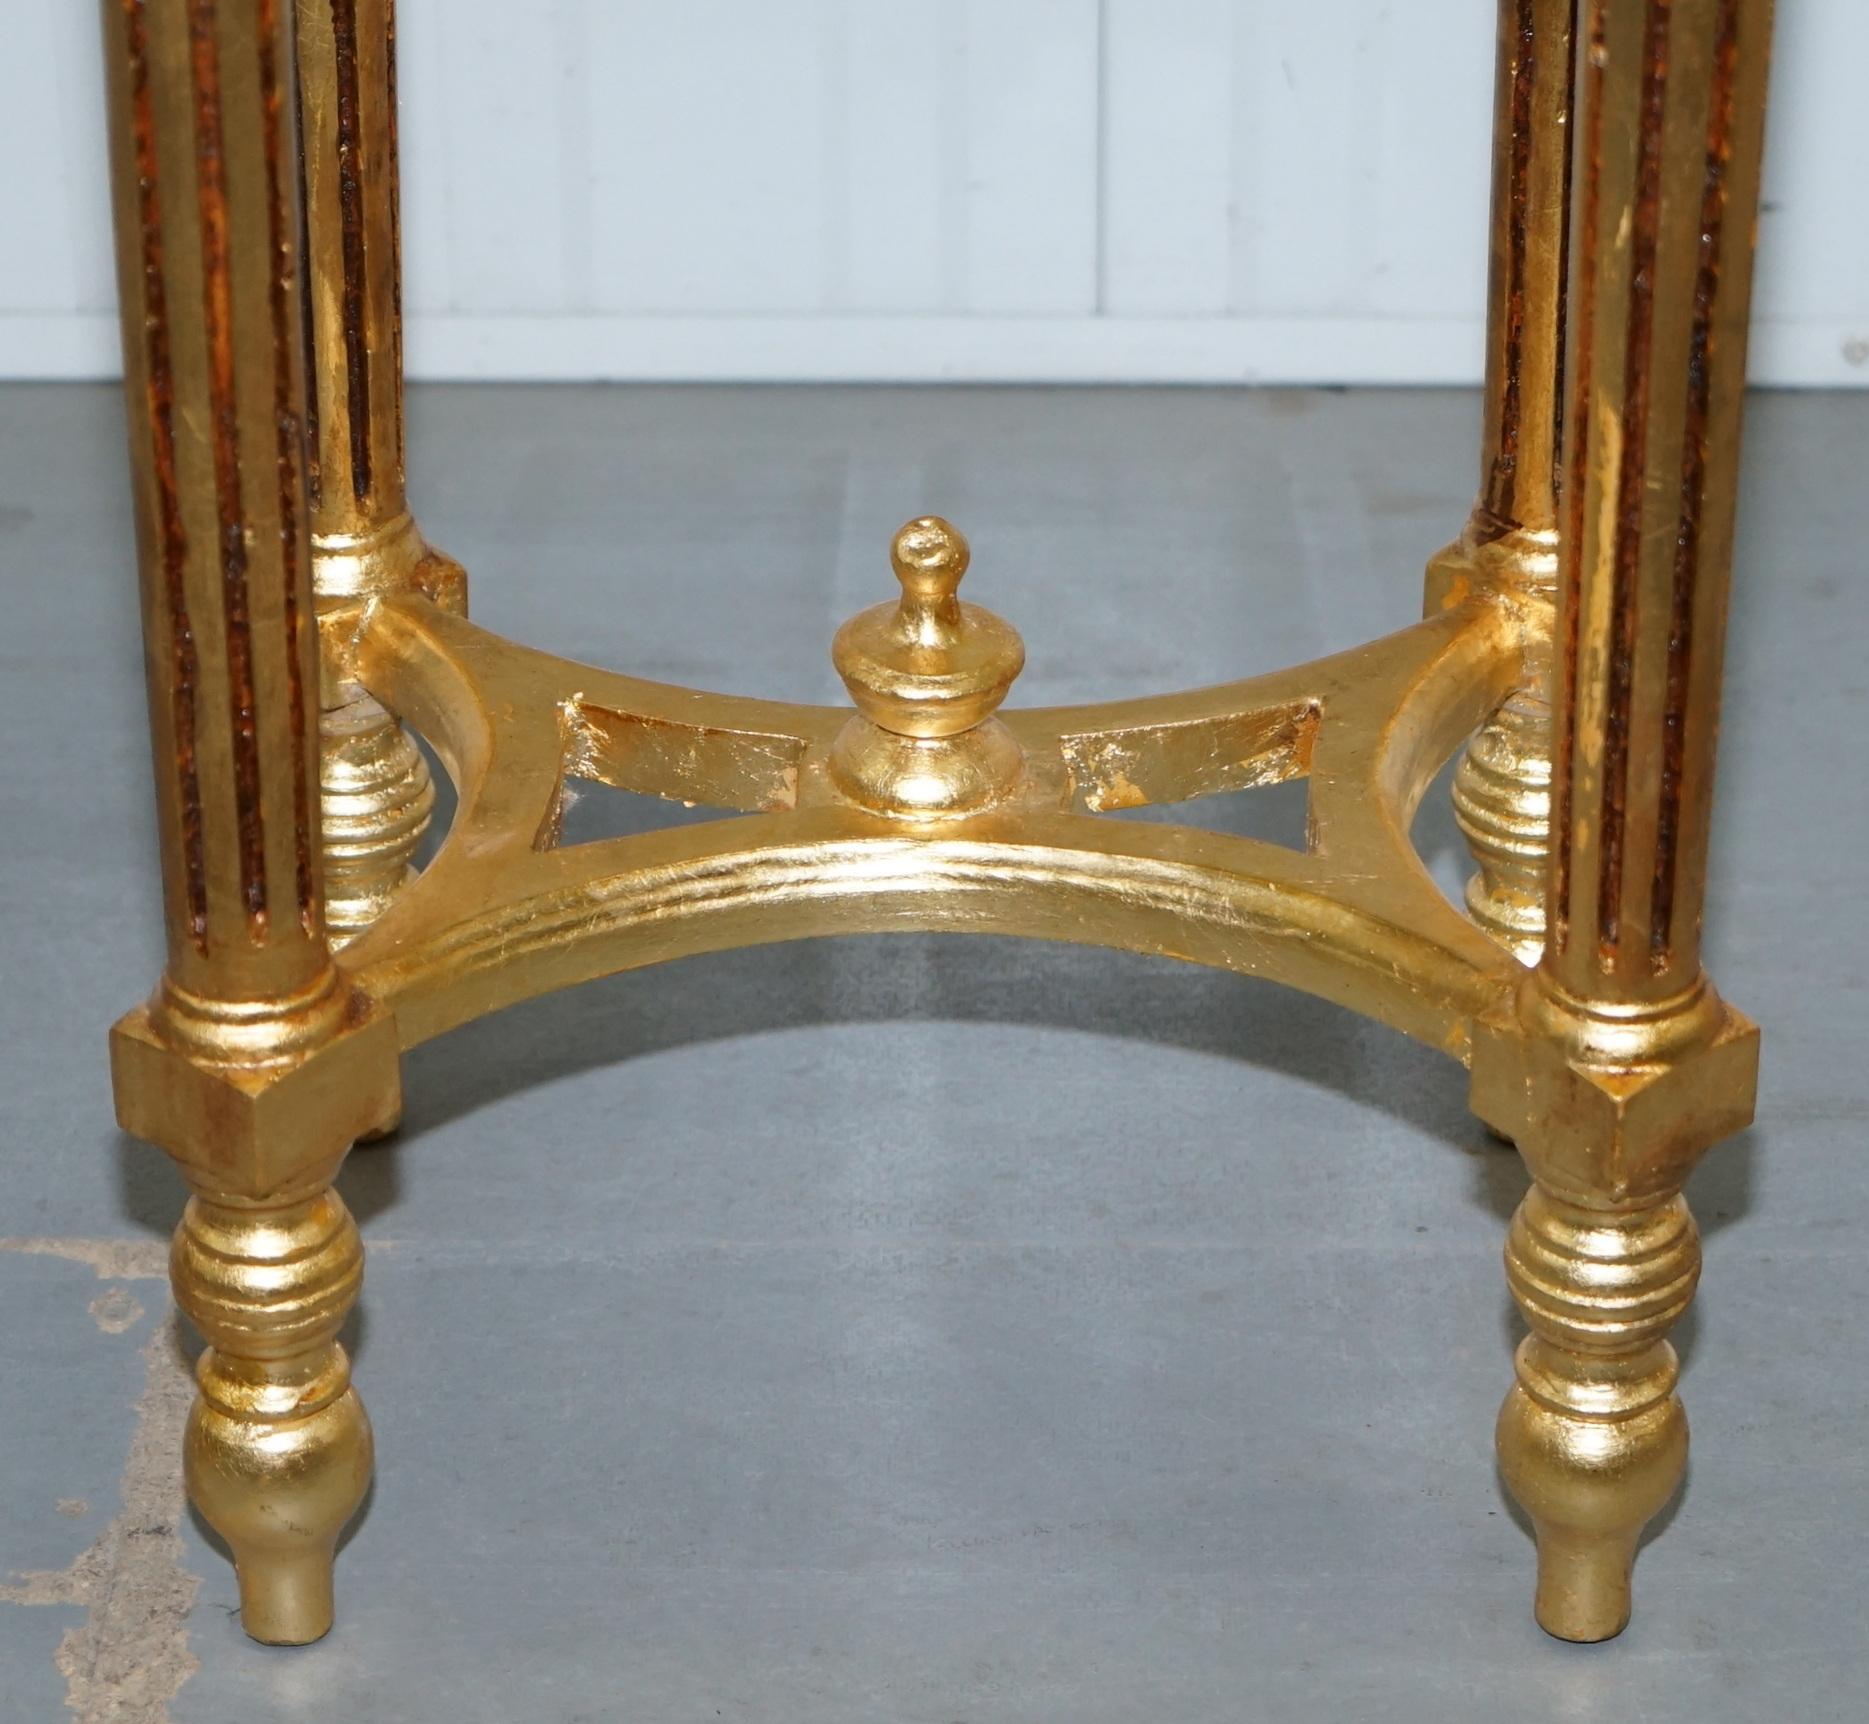 Stunning Pair of Antique French Gold Giltwood & Marble Jardiniere Display Stands 1